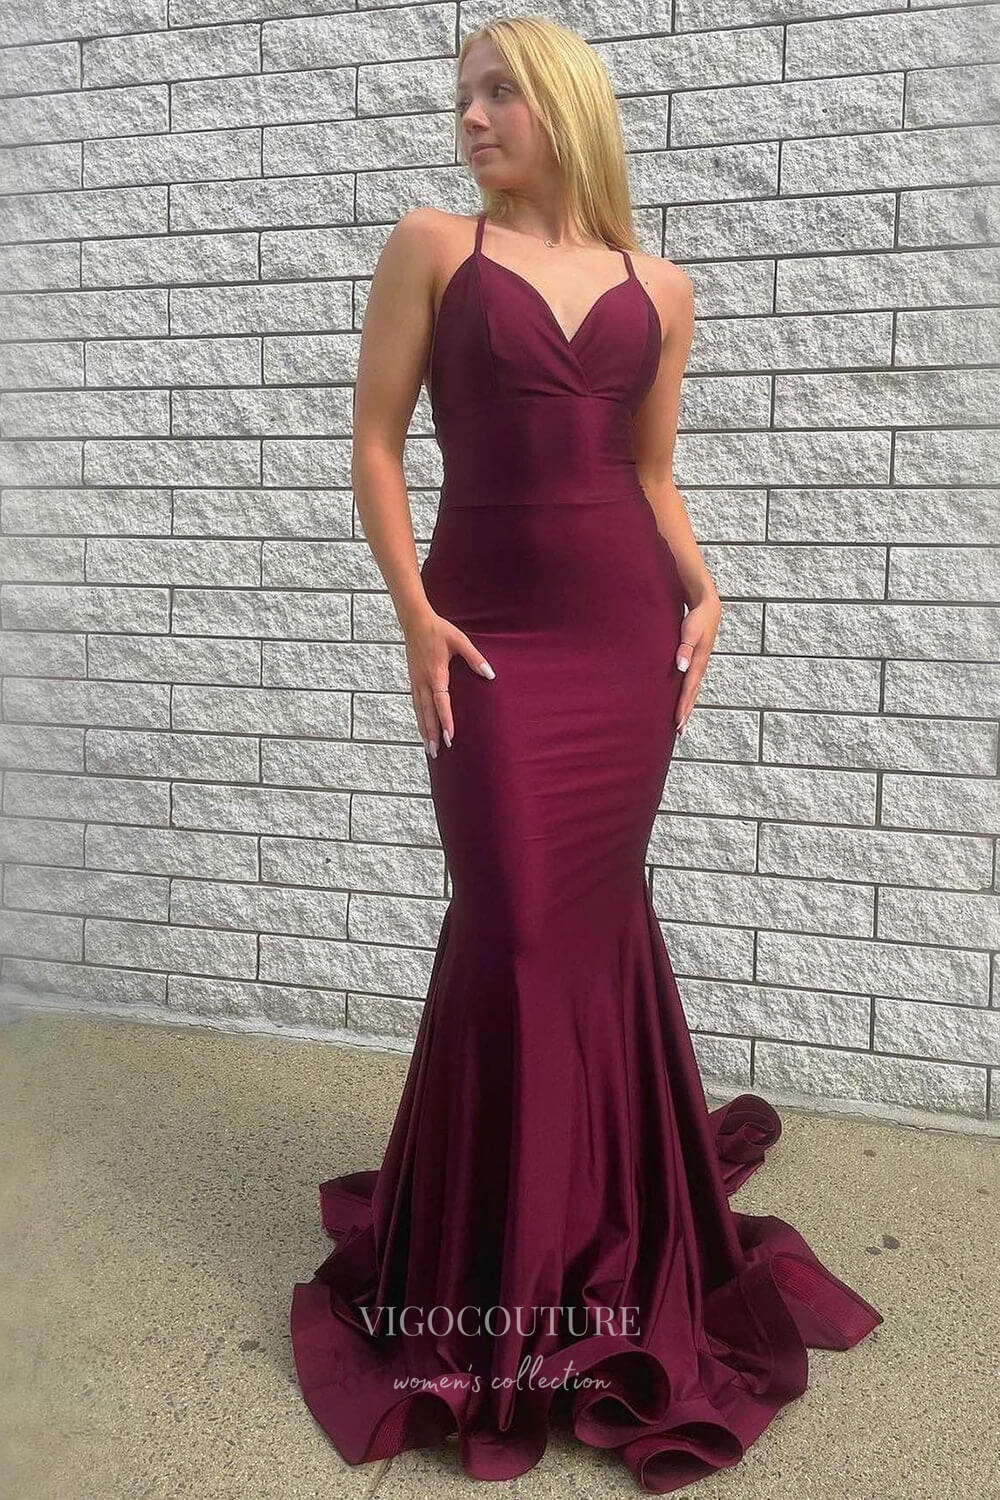 Burgundy Satin Mermaid Prom Dress - Featuring Spaghetti Strap and a Jaw-Dropping V-Neck 22233-Prom Dresses-vigocouture-Burgundy-Custom Size-vigocouture